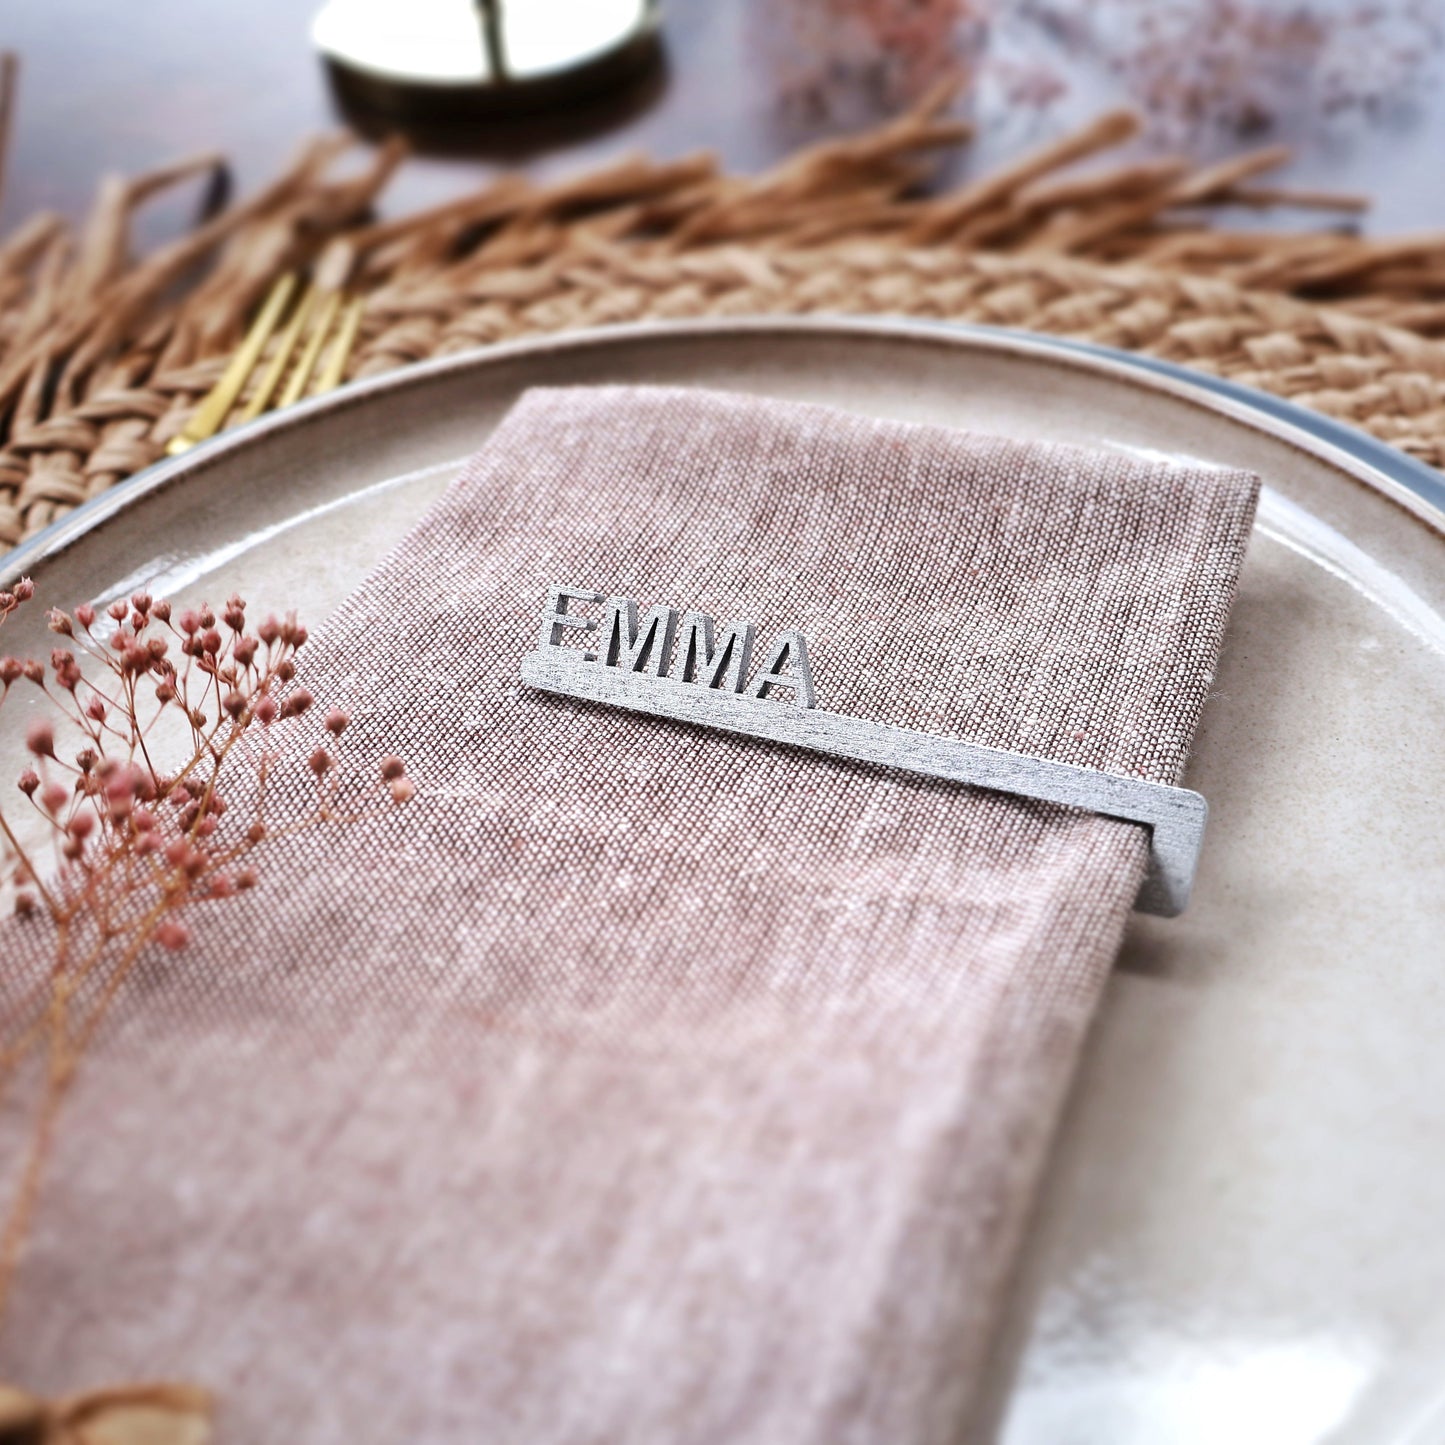 silver wooden personalized napkin tags custom napkin rings acrylic wedding name cards guest place card bachelorette dinner party name tag stationary place tag napkin rings custom napkin rings wood napkin ring holder napkin rings wedding decoration